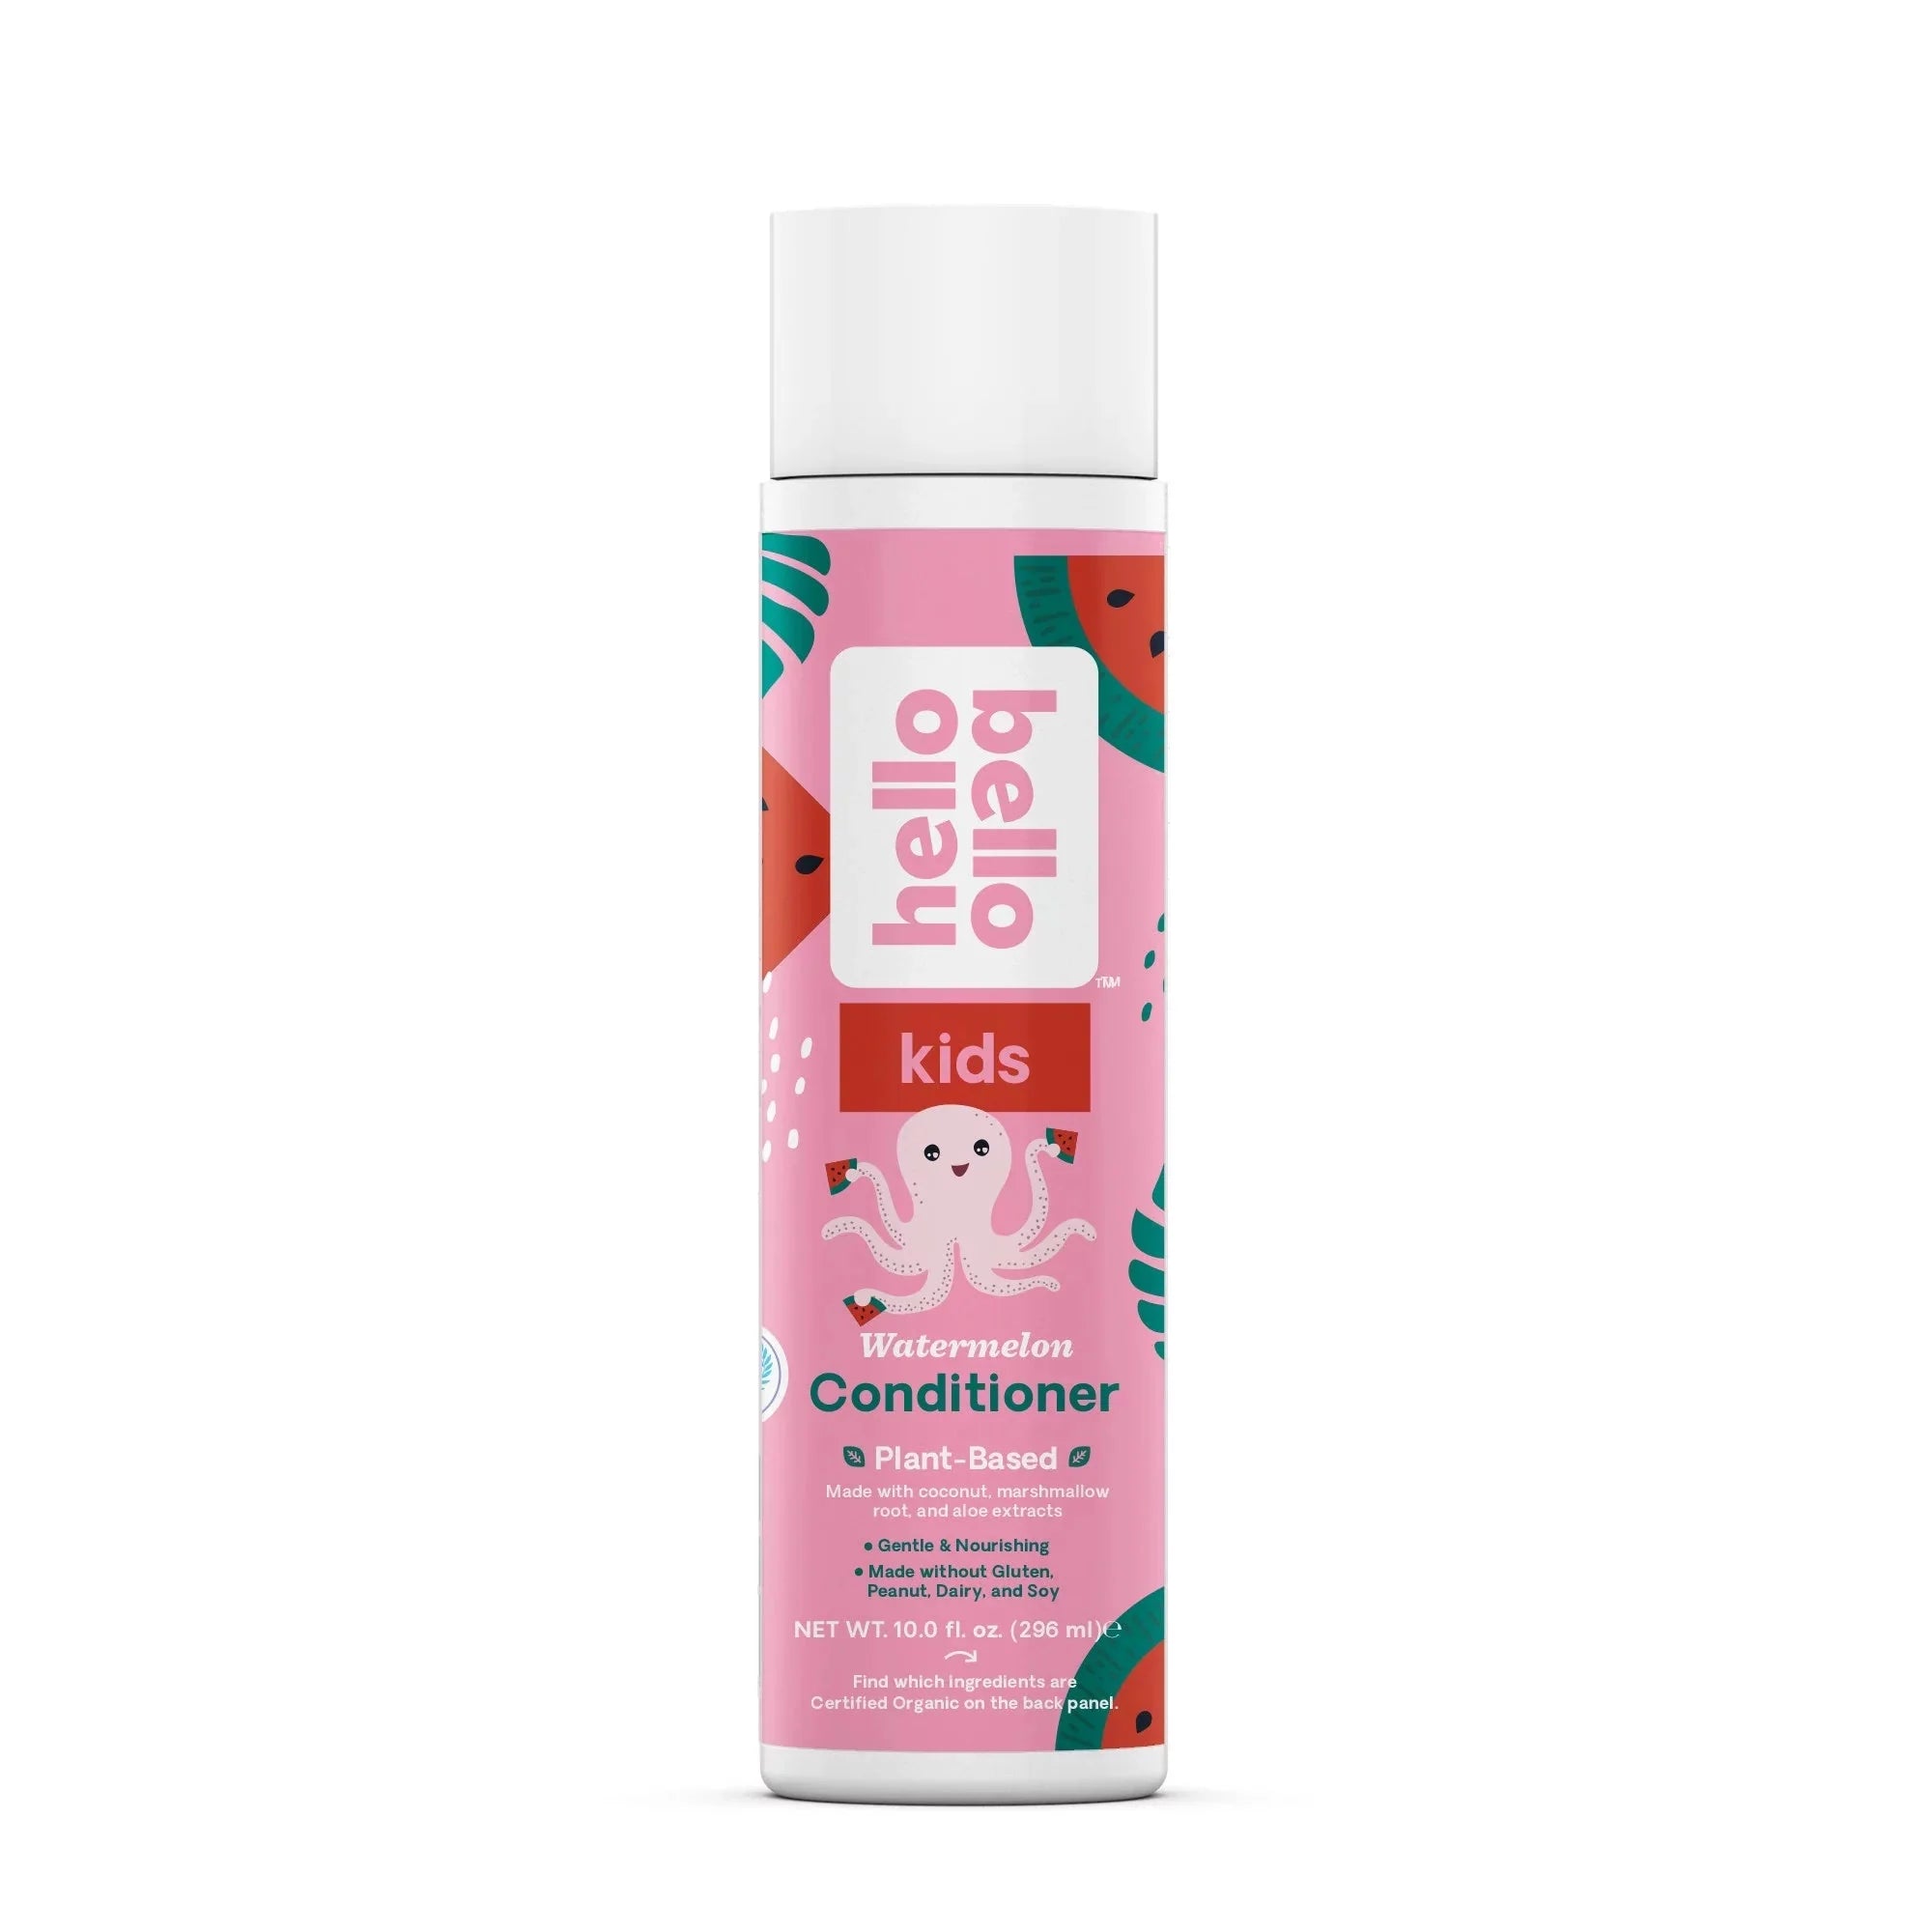 Wholesale prices with free shipping all over United States Hello Bello Kid's Conditioner, Gentle Moisturizing Plant-Based Formula, Watermelon Scent, 10 fl oz - Steven Deals